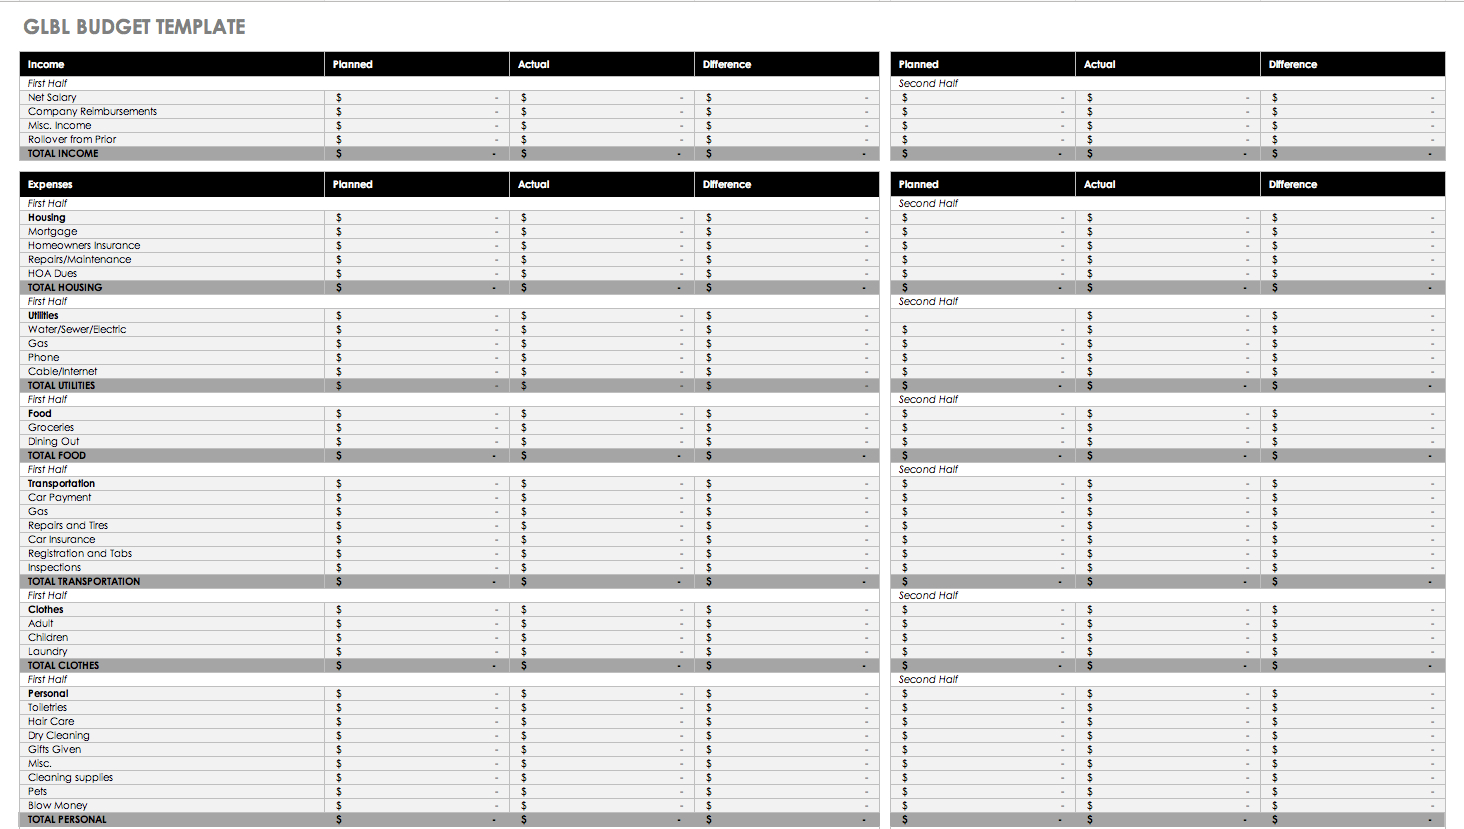 Budget Your Money Spreadsheet In Free Budget Templates In Excel For Any Use